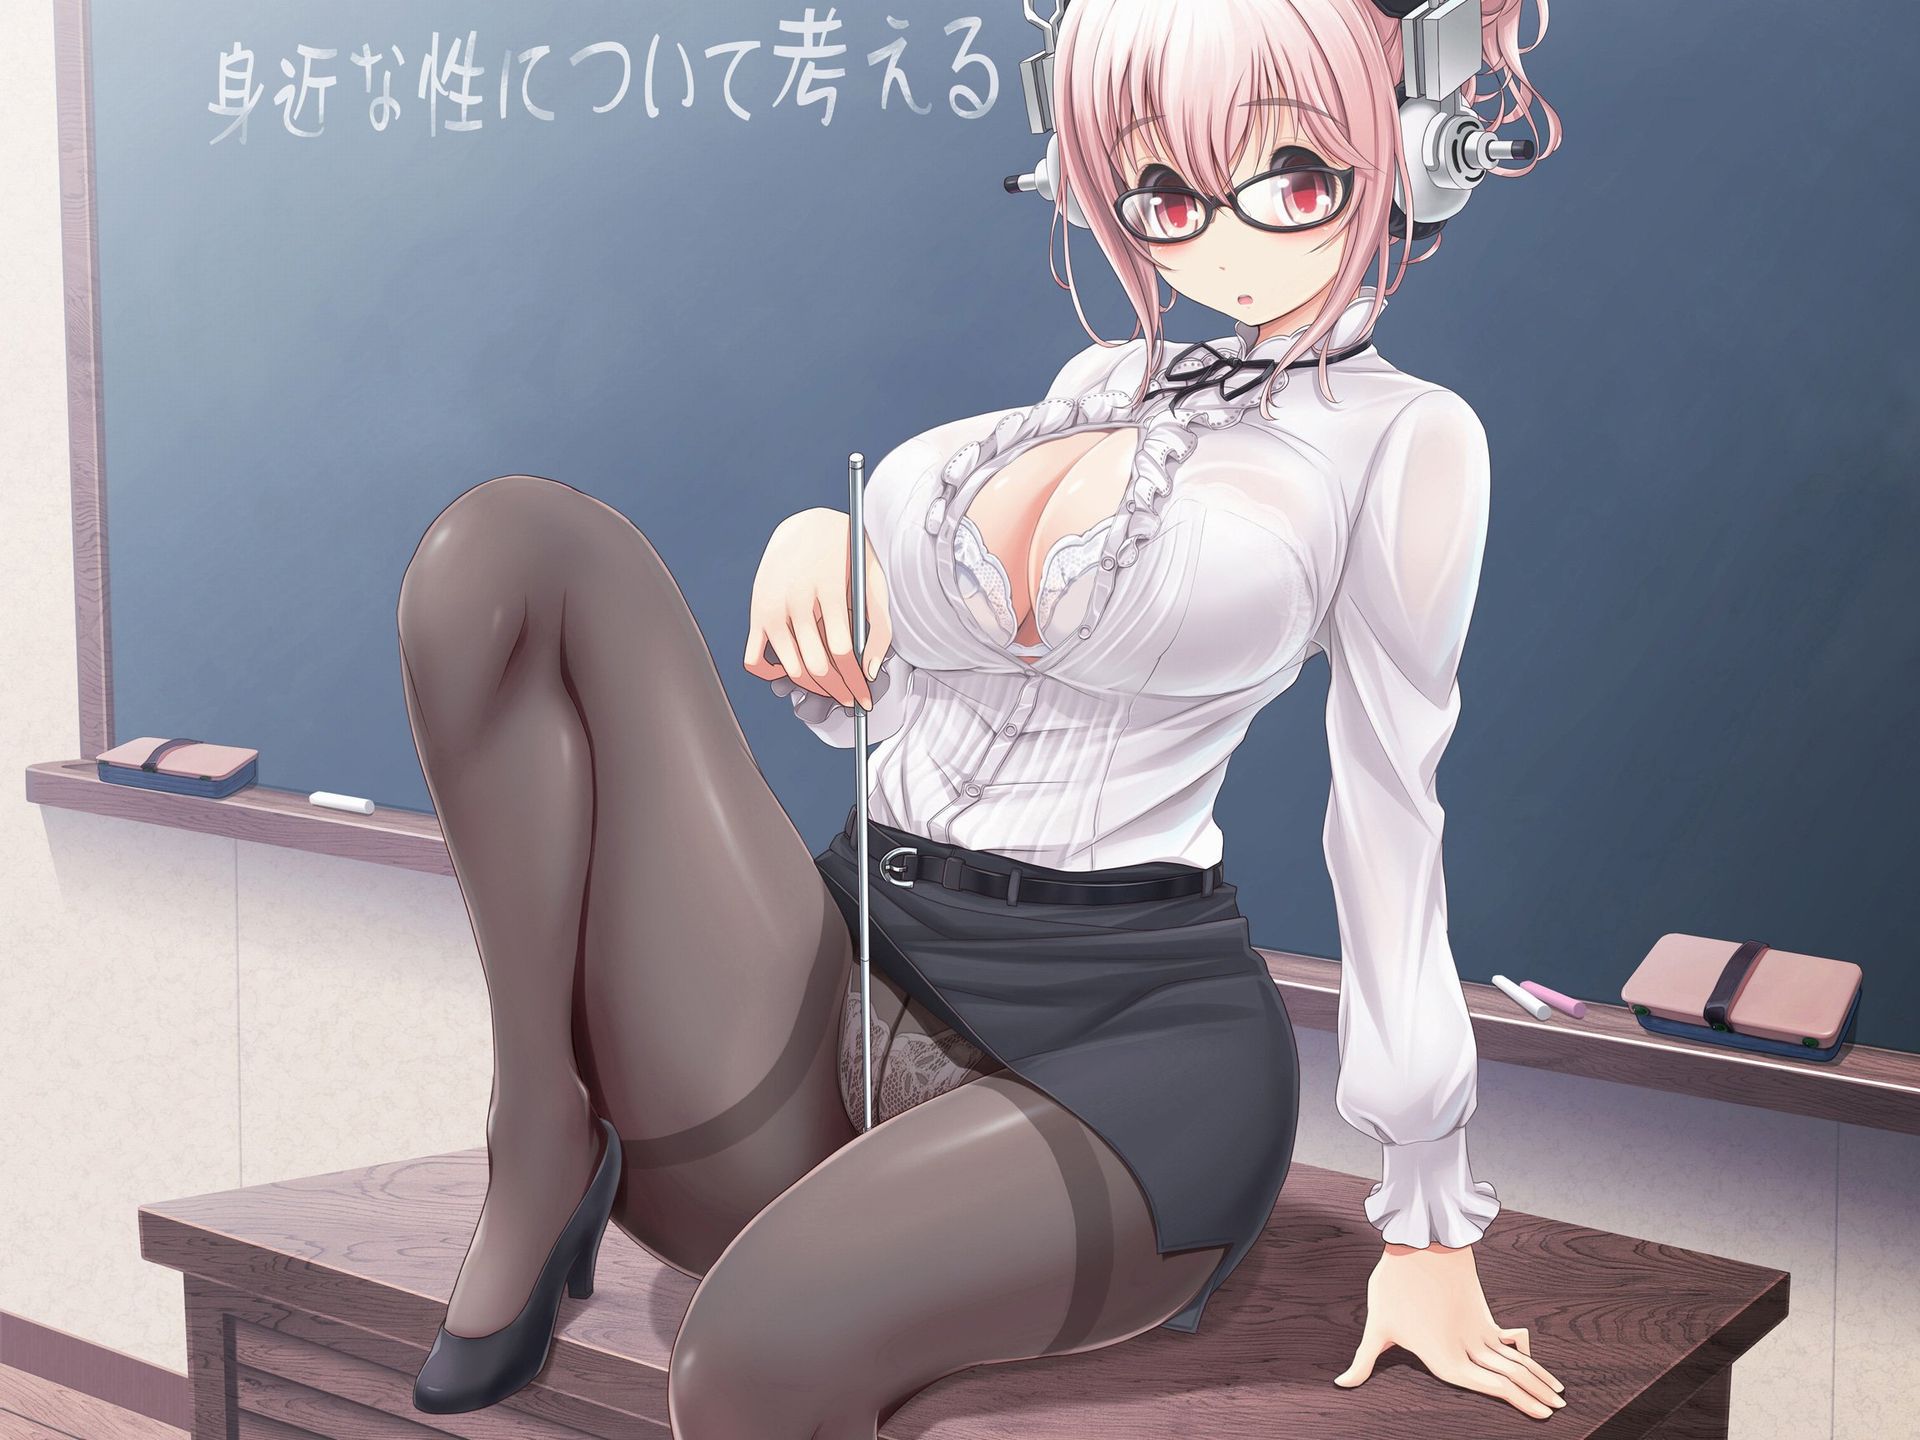 [Secondary ZIP] bra skirt image of the rainbow Girl who looks at a glimpse 18